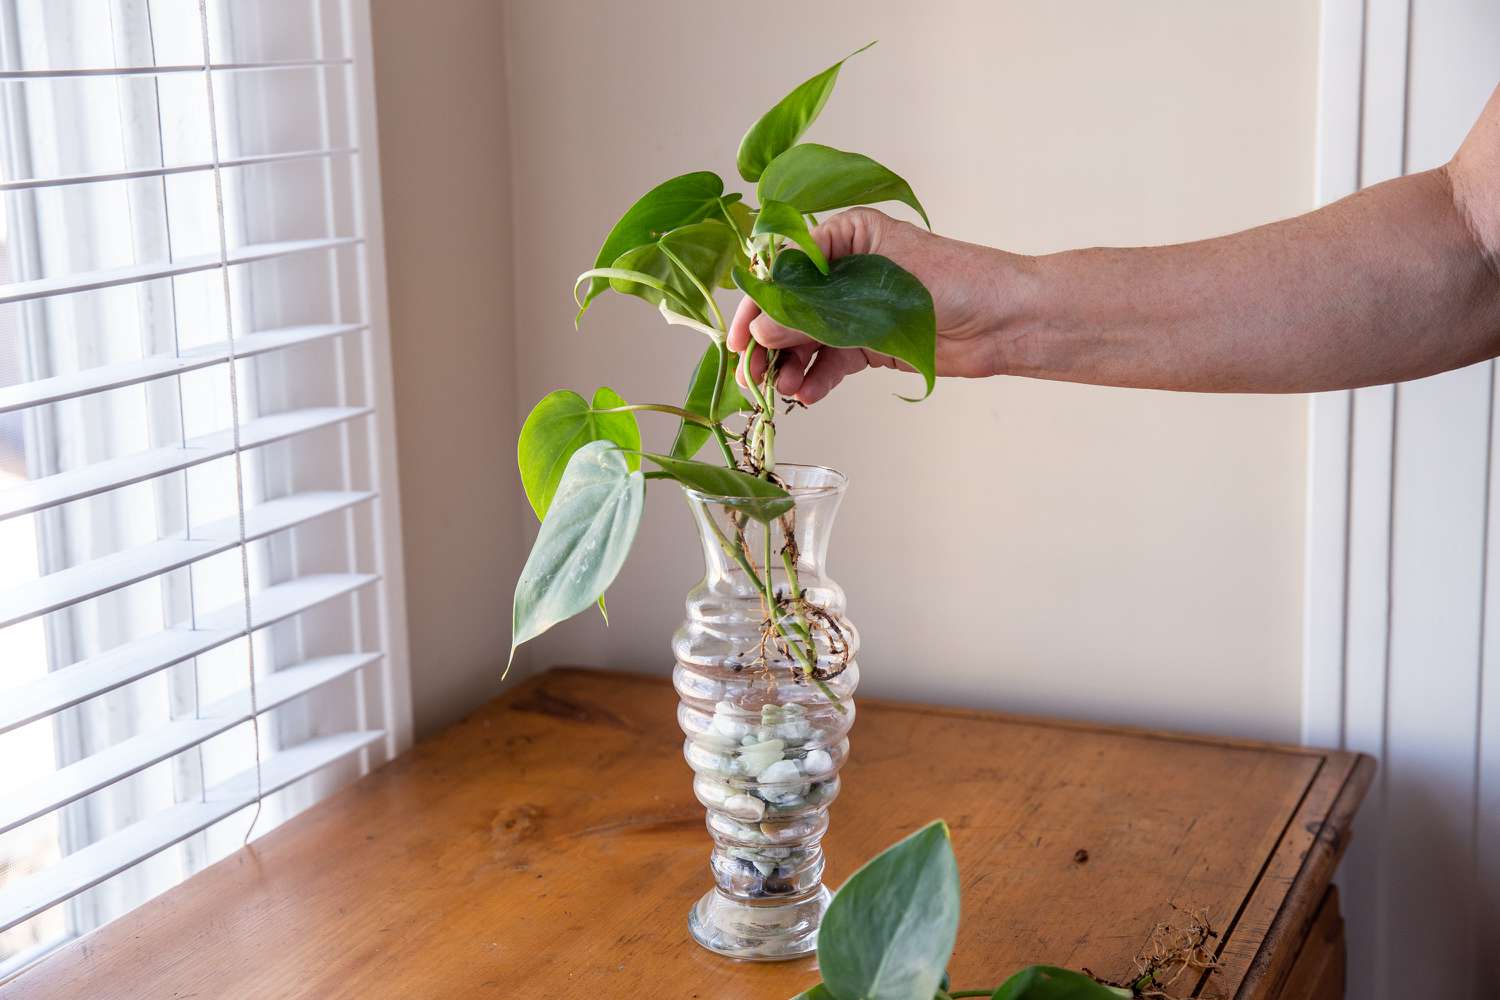 Pothos plant roots placed in glass vase for indoor water garden